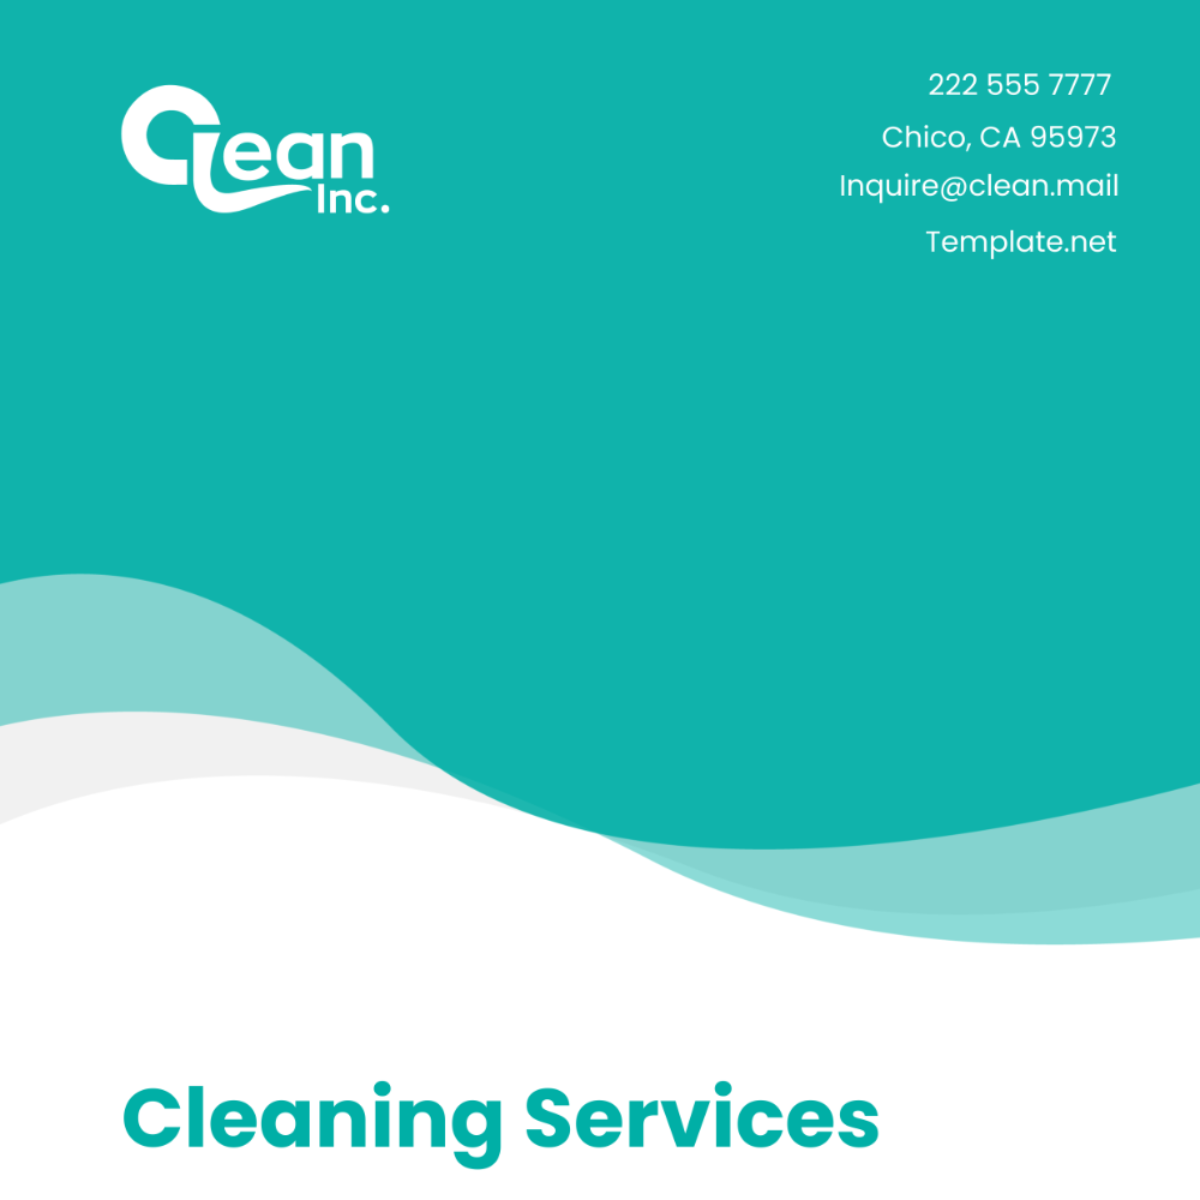 Cleaning Services Employee Training Manual on Legal Issues Template